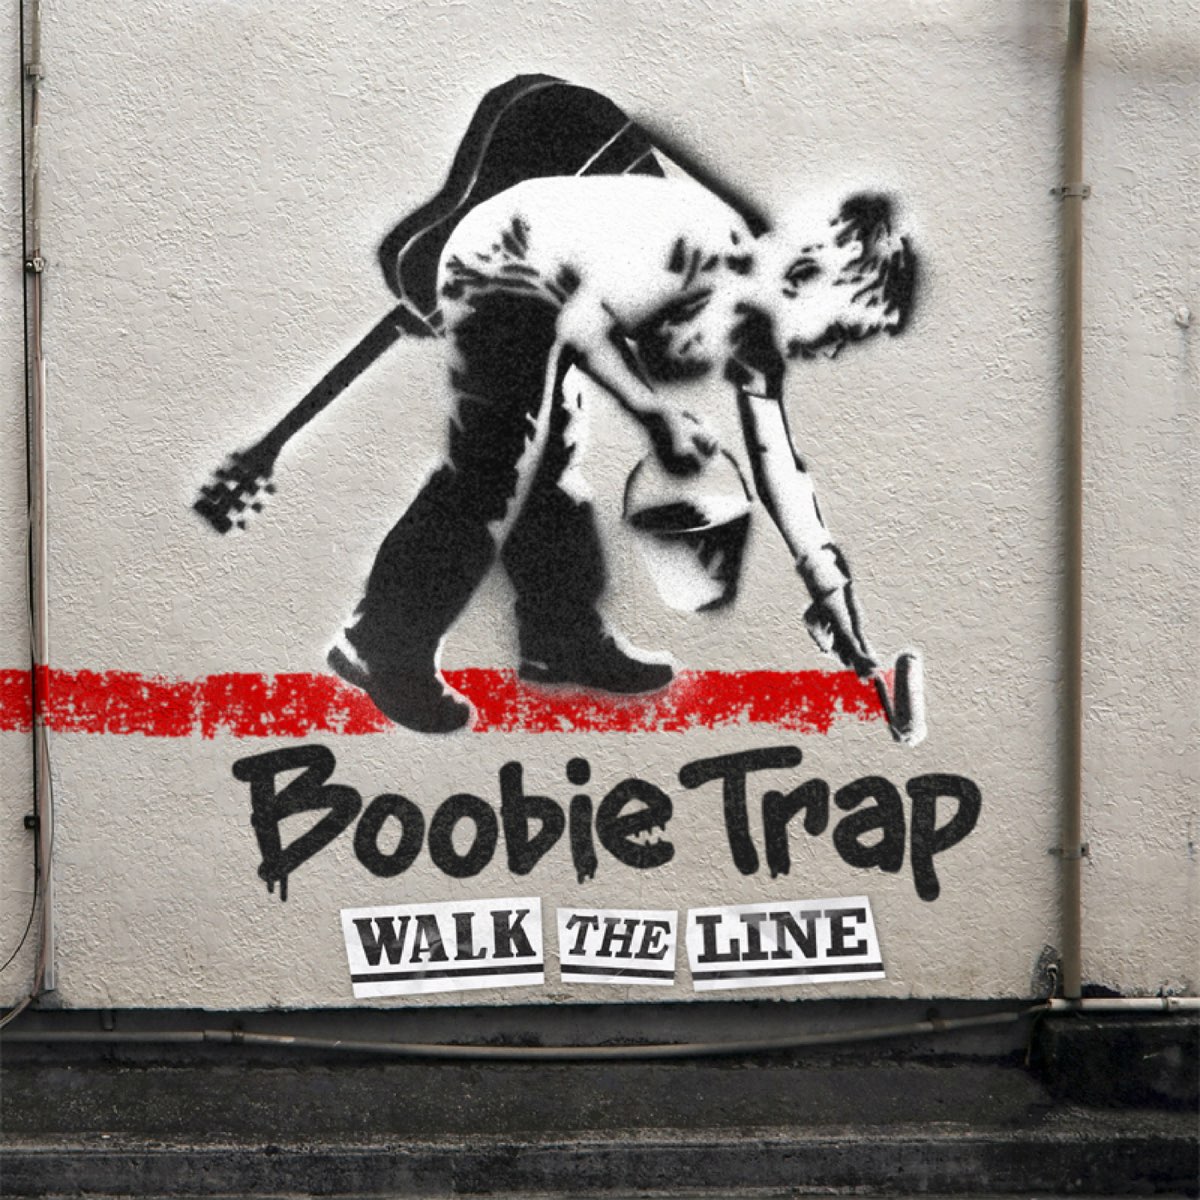 Booby Trap. Boobie - Boobie Trap (1993). Poobie is coming. Booby trapping